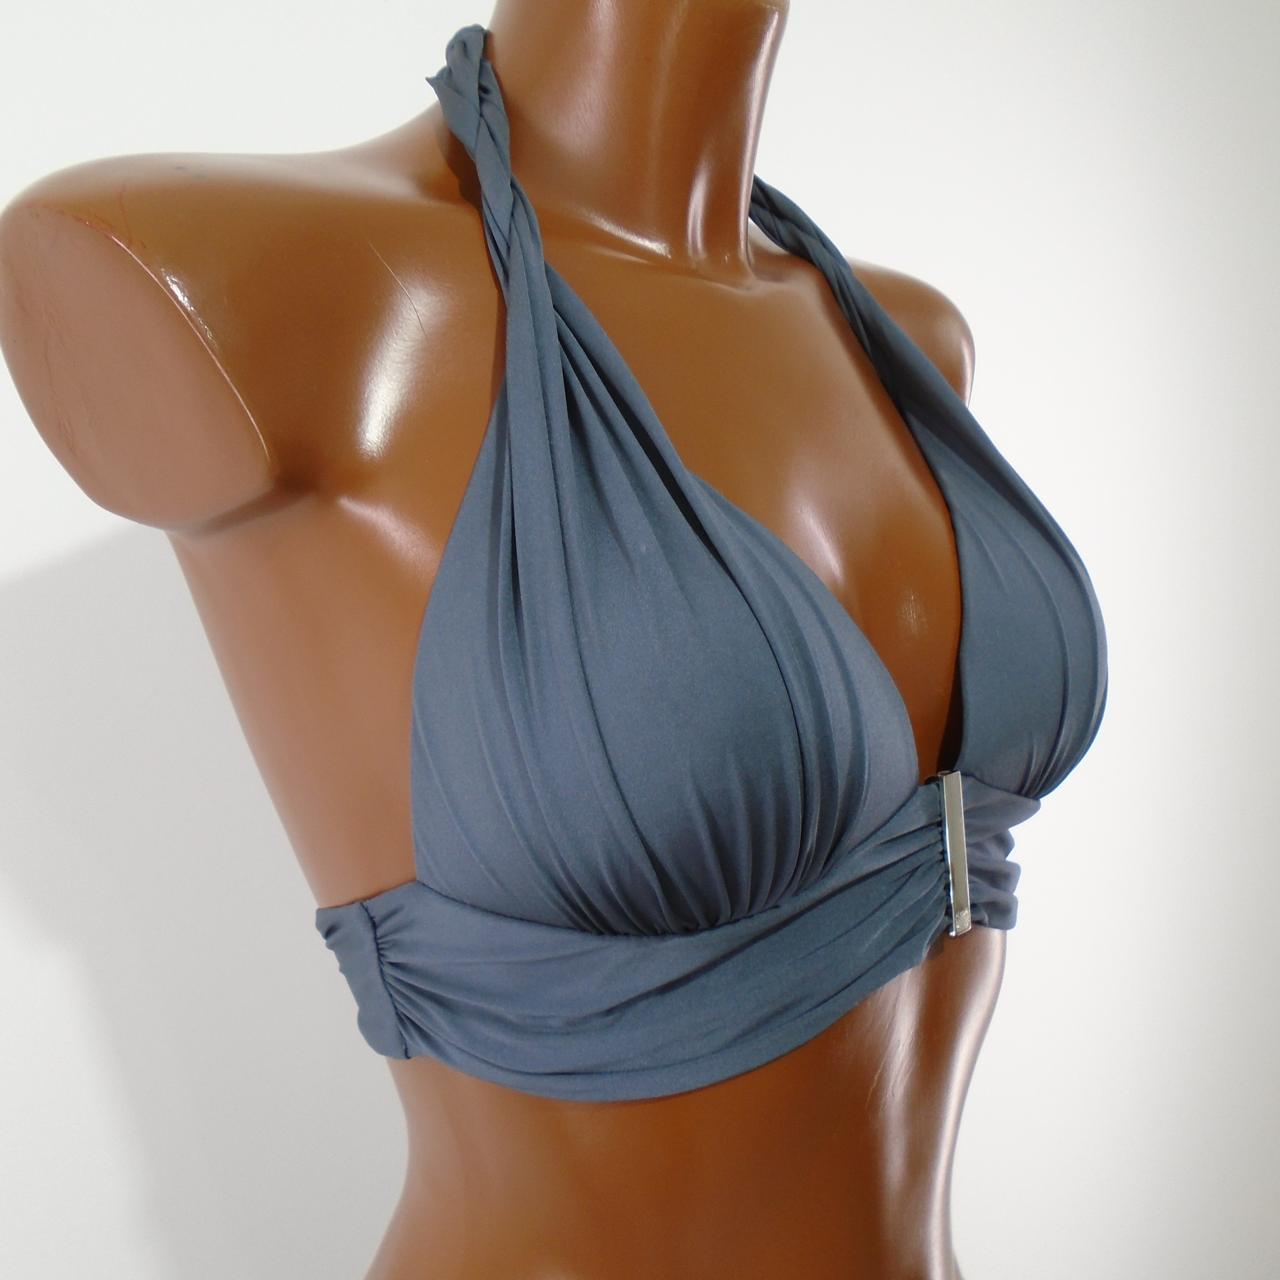 Women's Swimsuit George. Grey. XL. Used. Very good